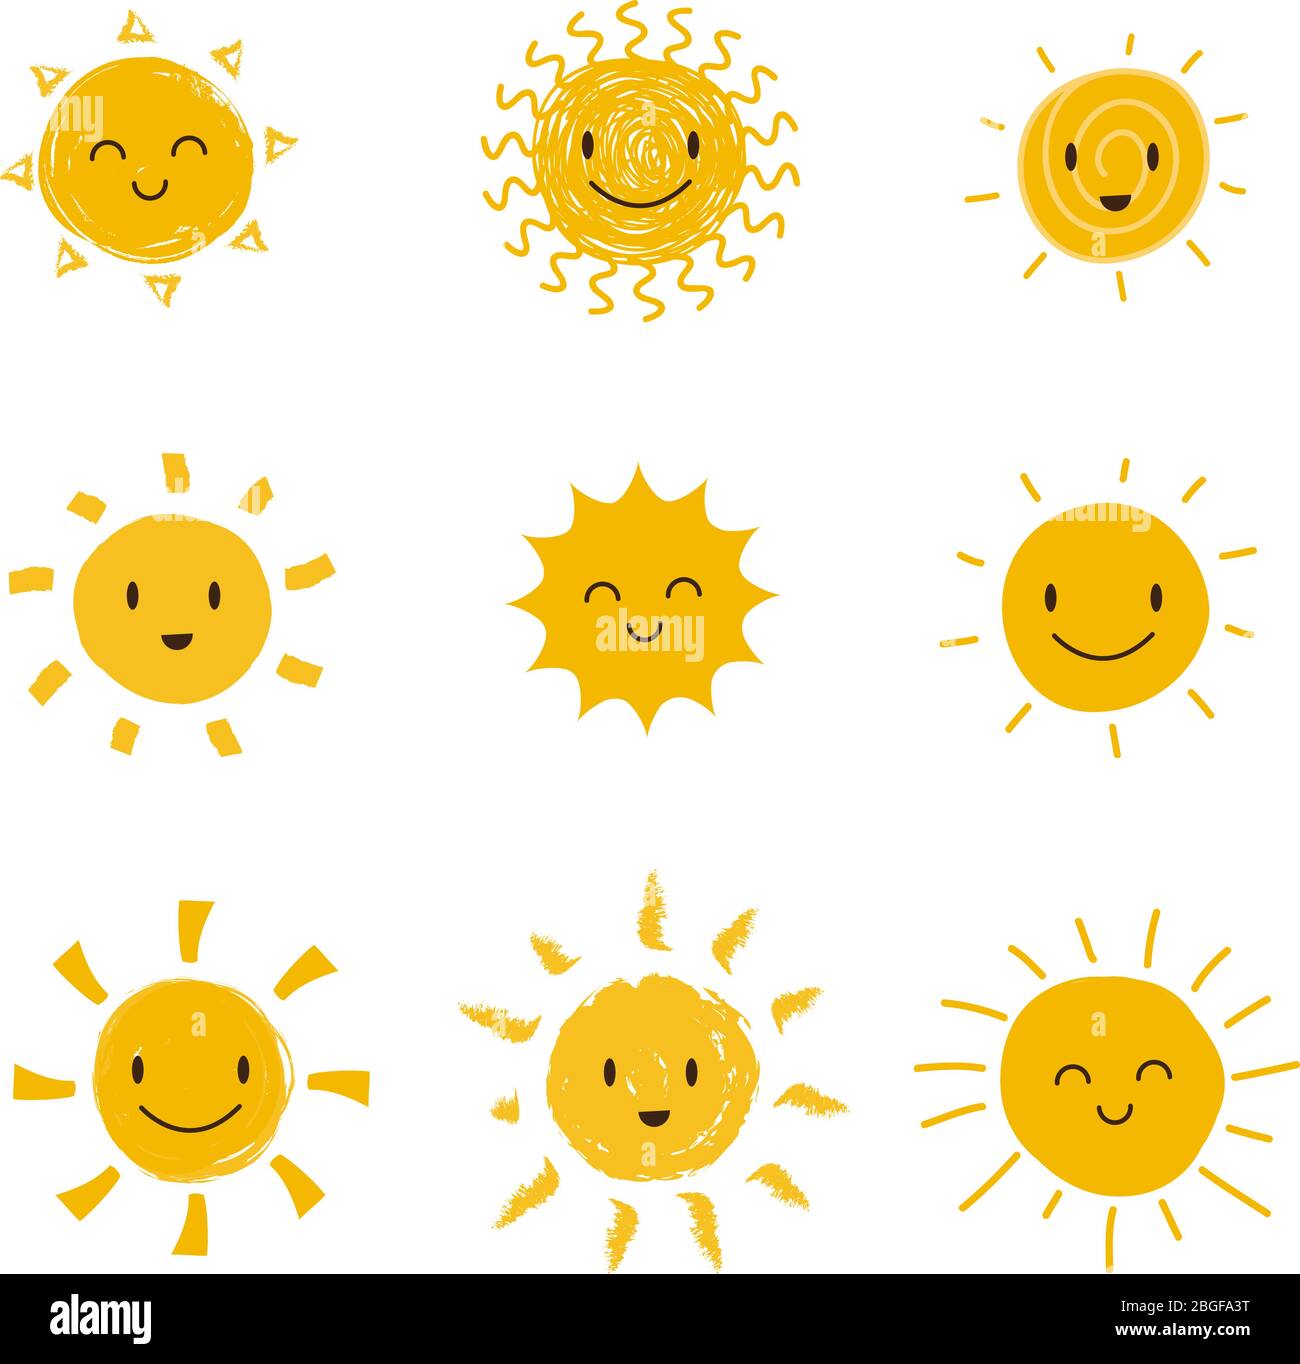 Sunshine face Stock Vector Images - Alamy